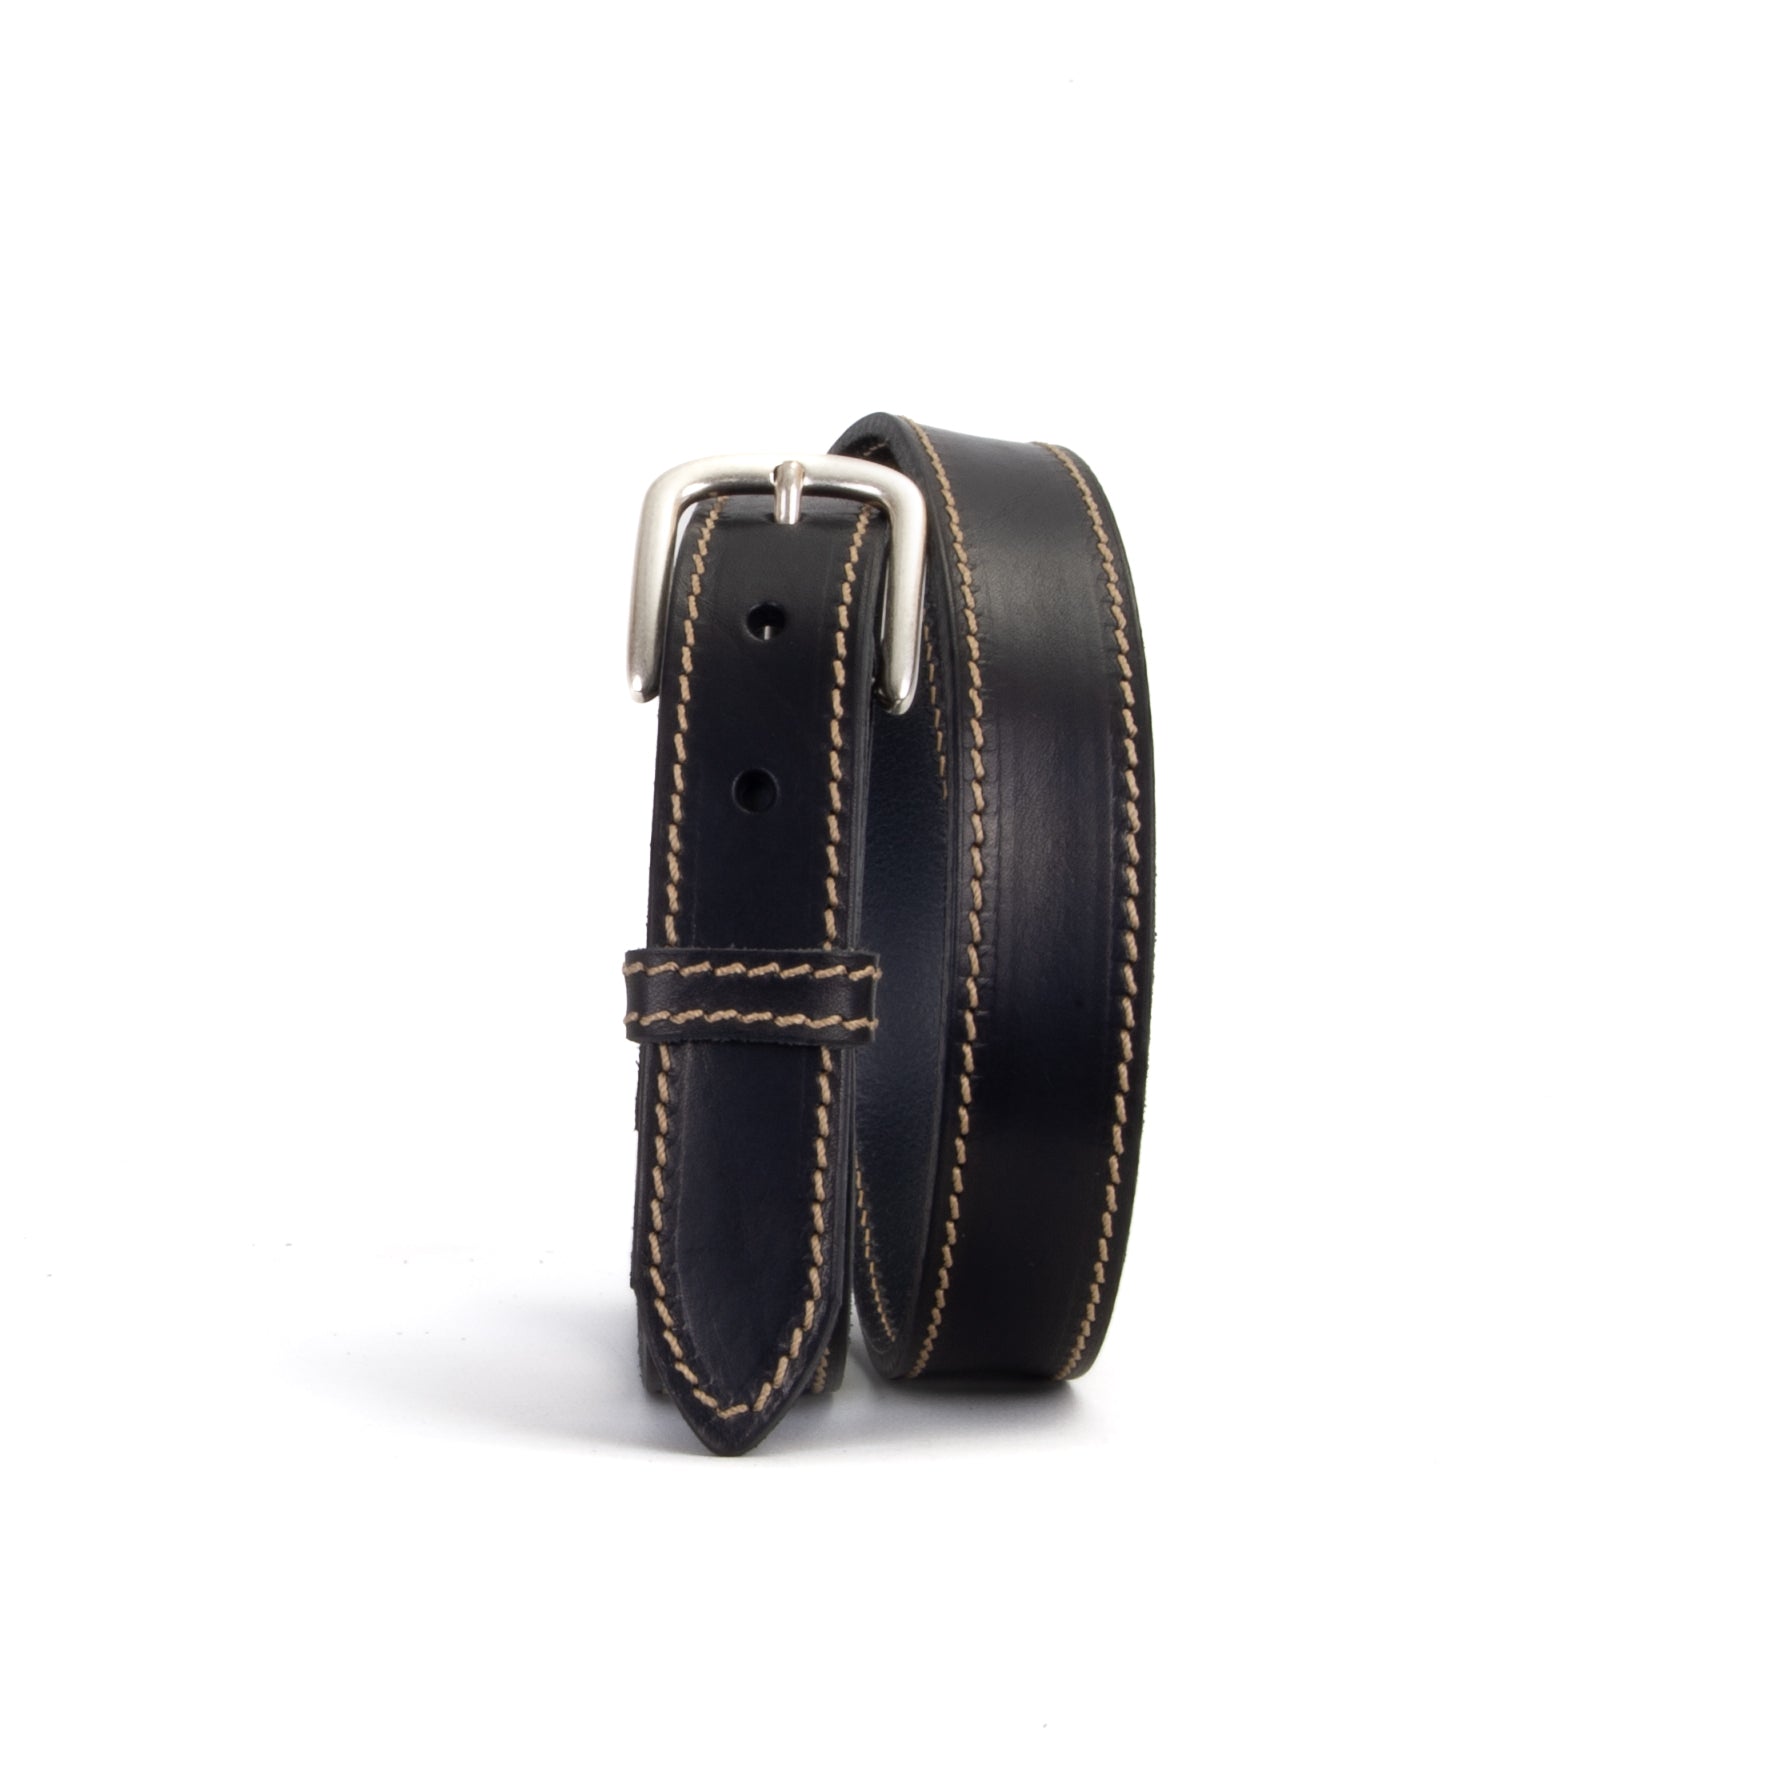 Black and Fawn 1 1/8" Stitched Leather Belt